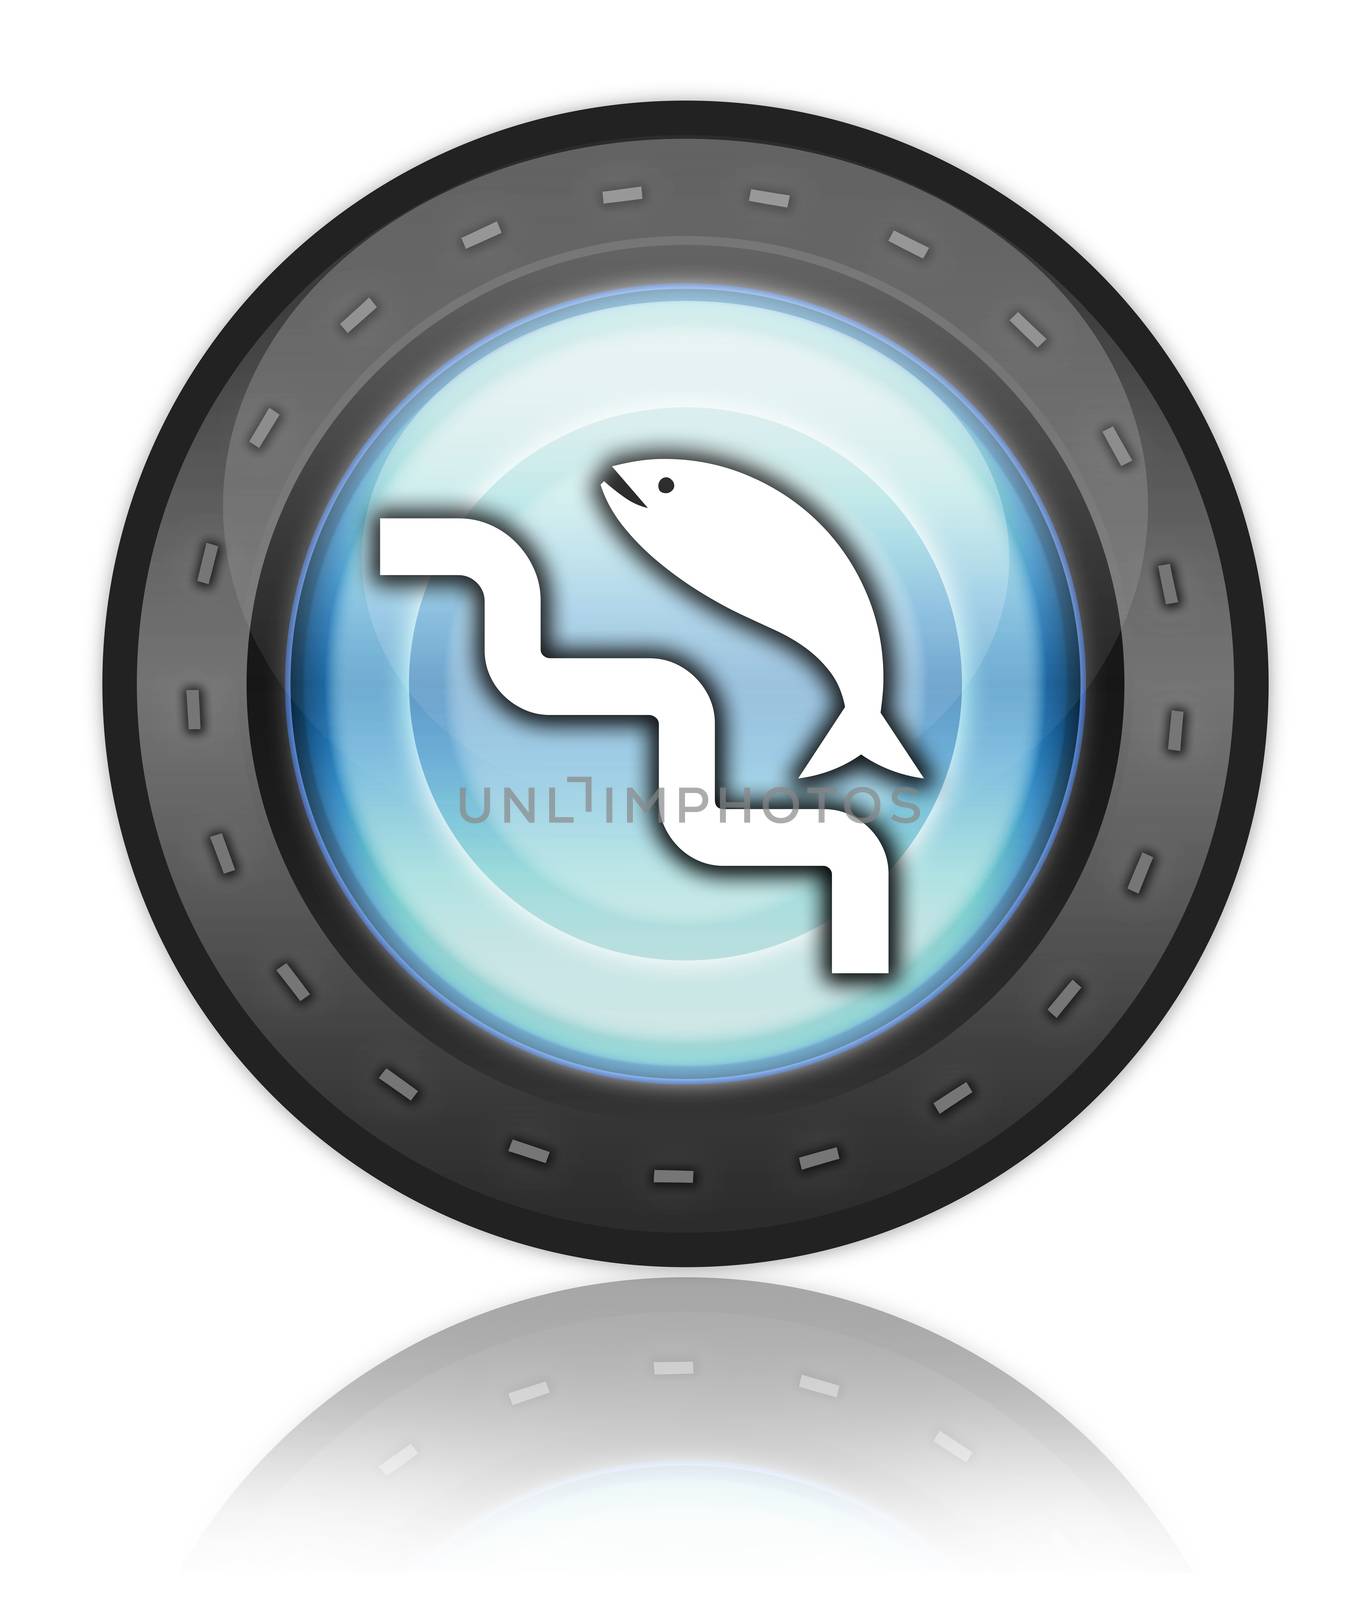 Icon, Button, Pictogram with Fish Ladder symbol